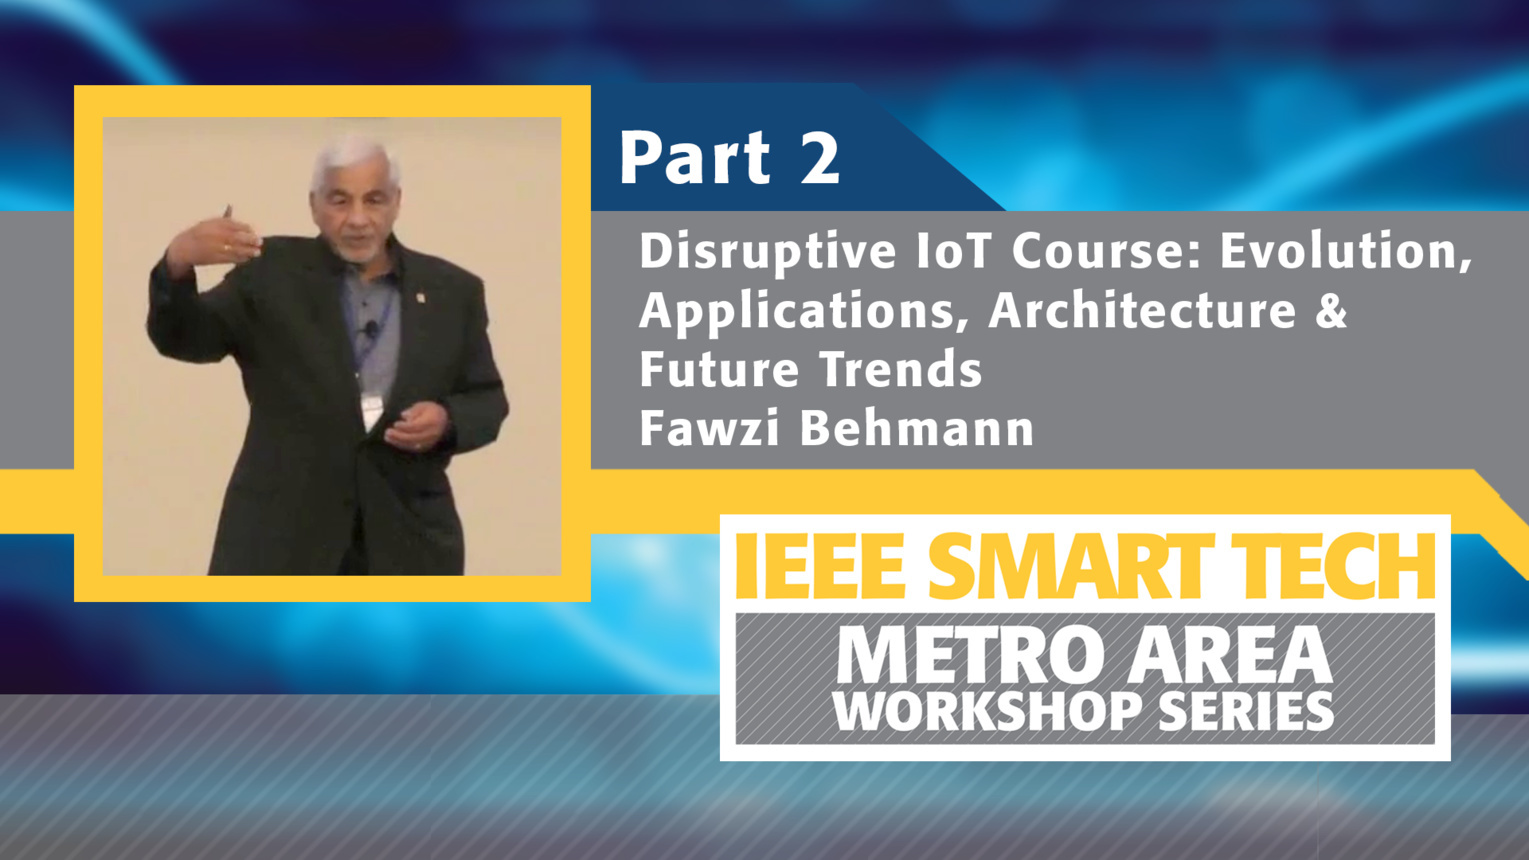 Disruptive Internet of Things course, Part 2 - IEEE Smart Tech Workshop